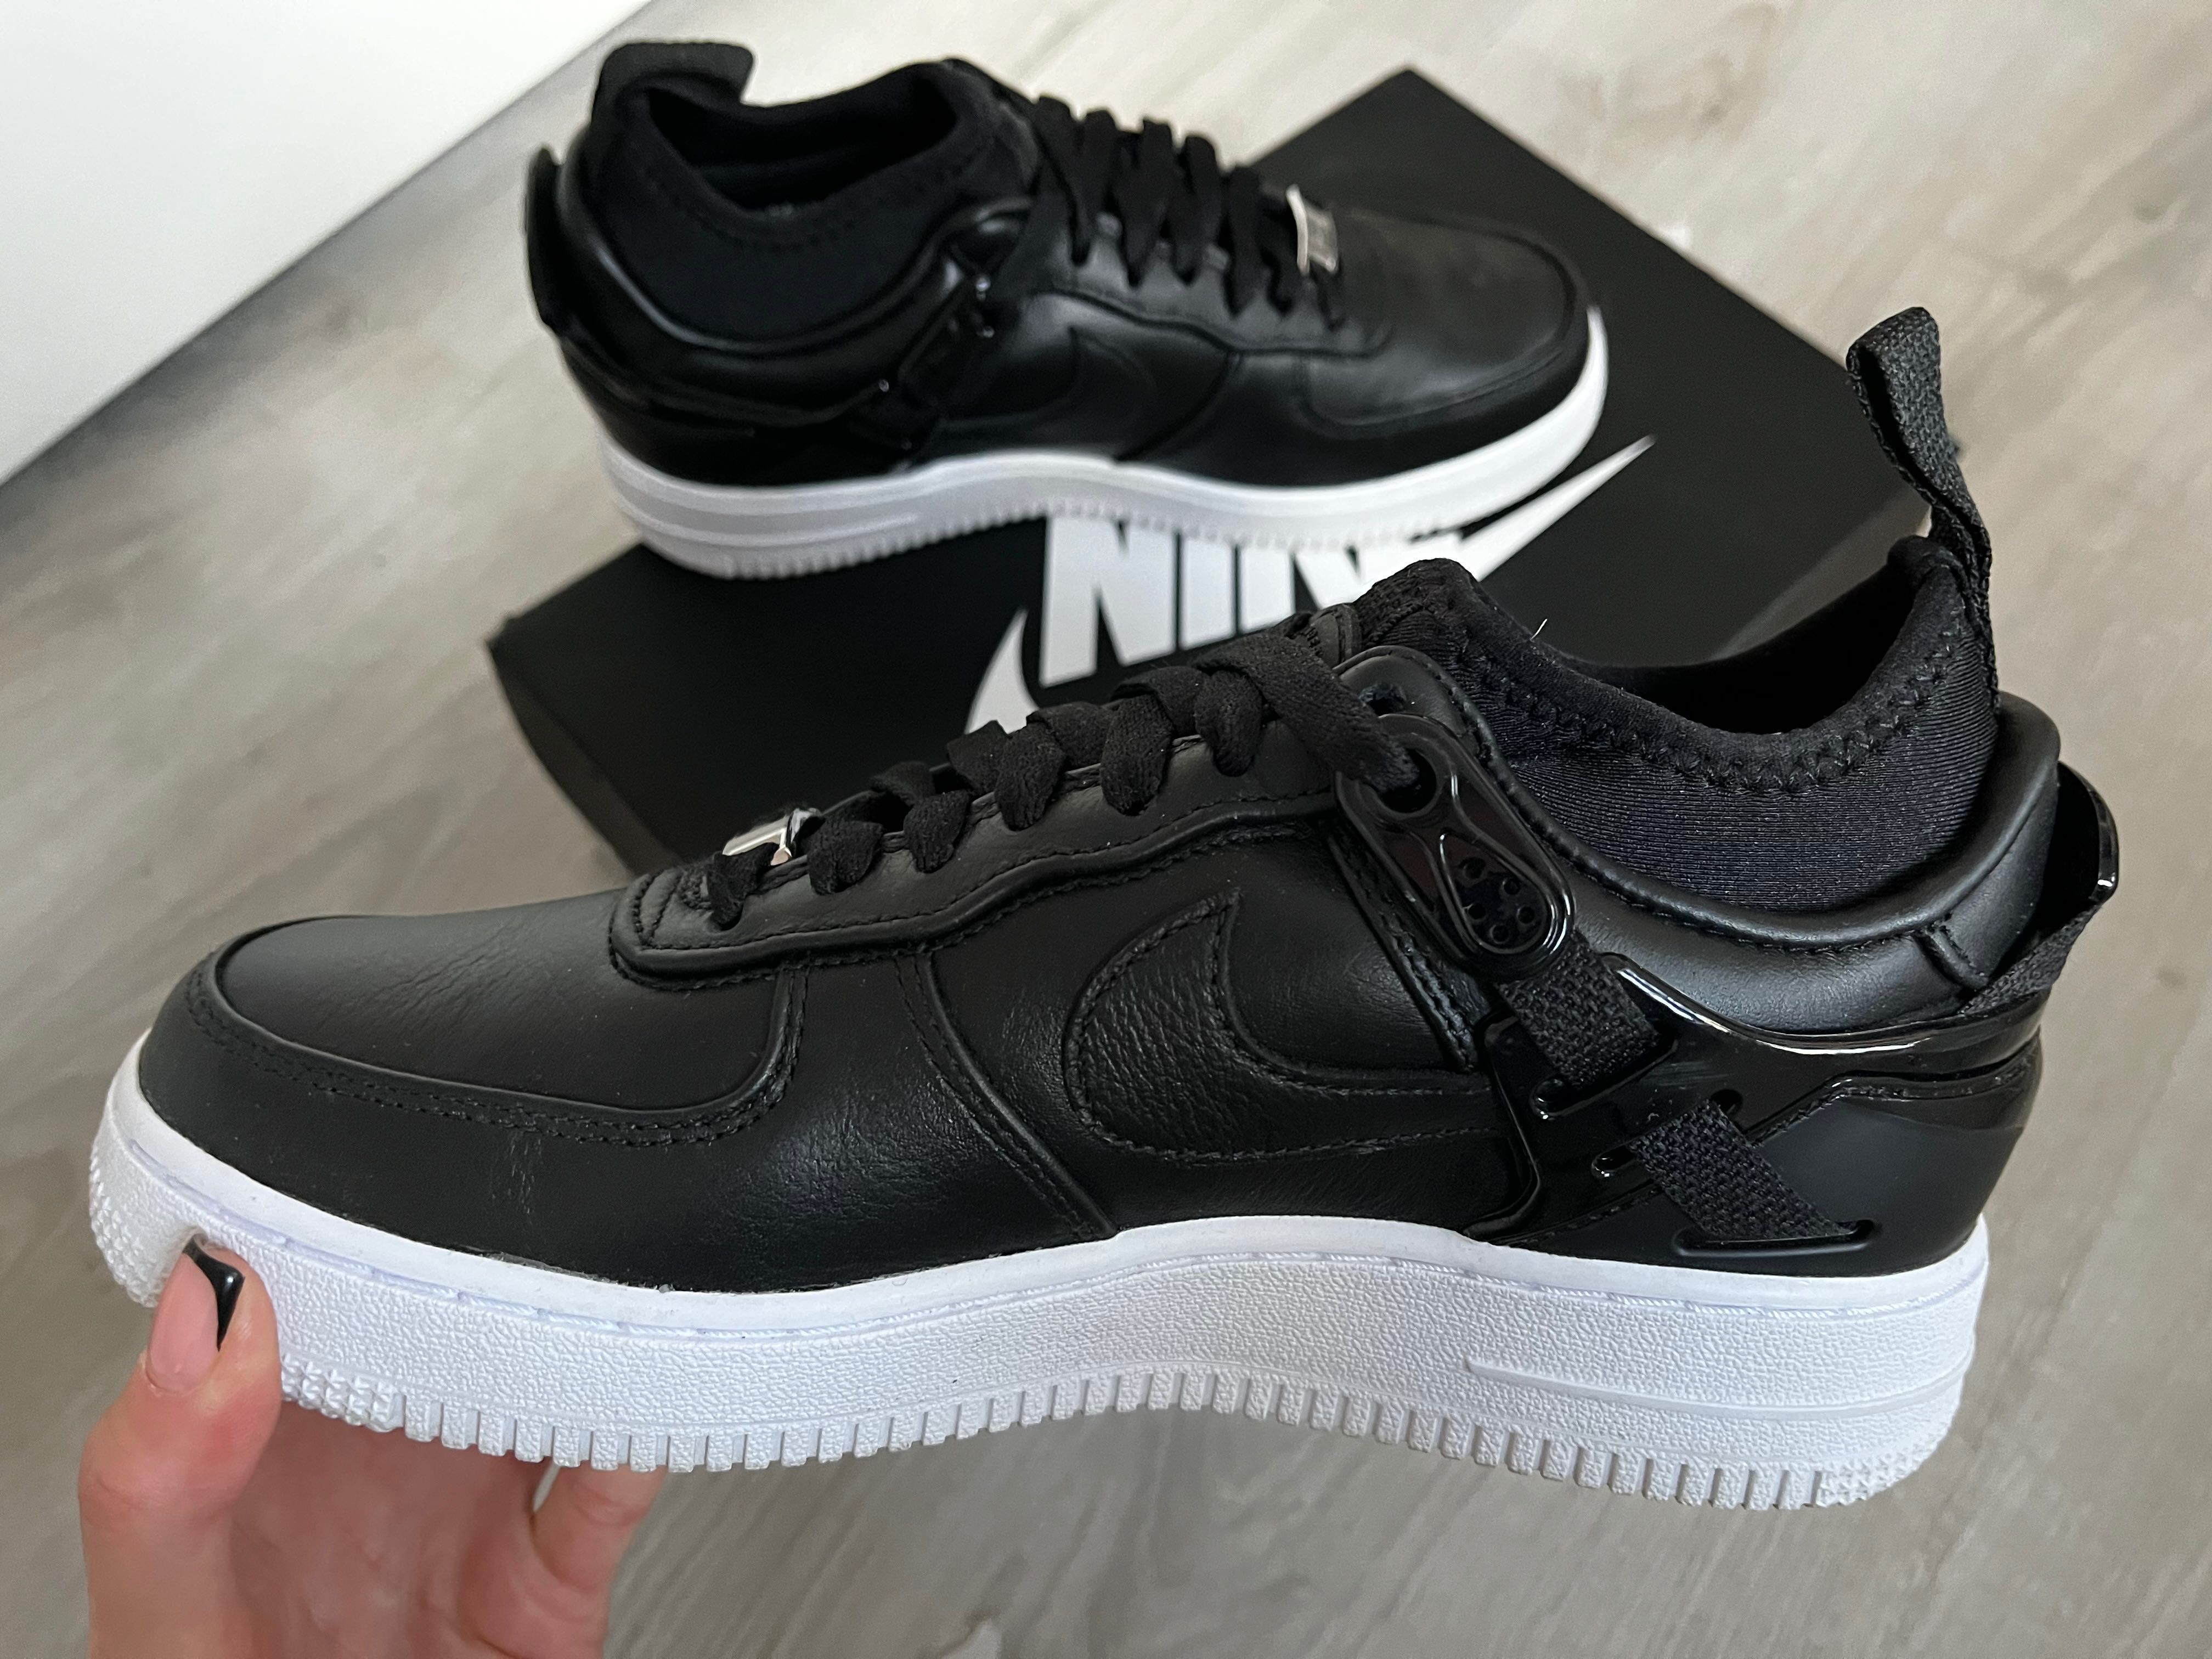 Nike x Undercover Air Force 1 Low SP